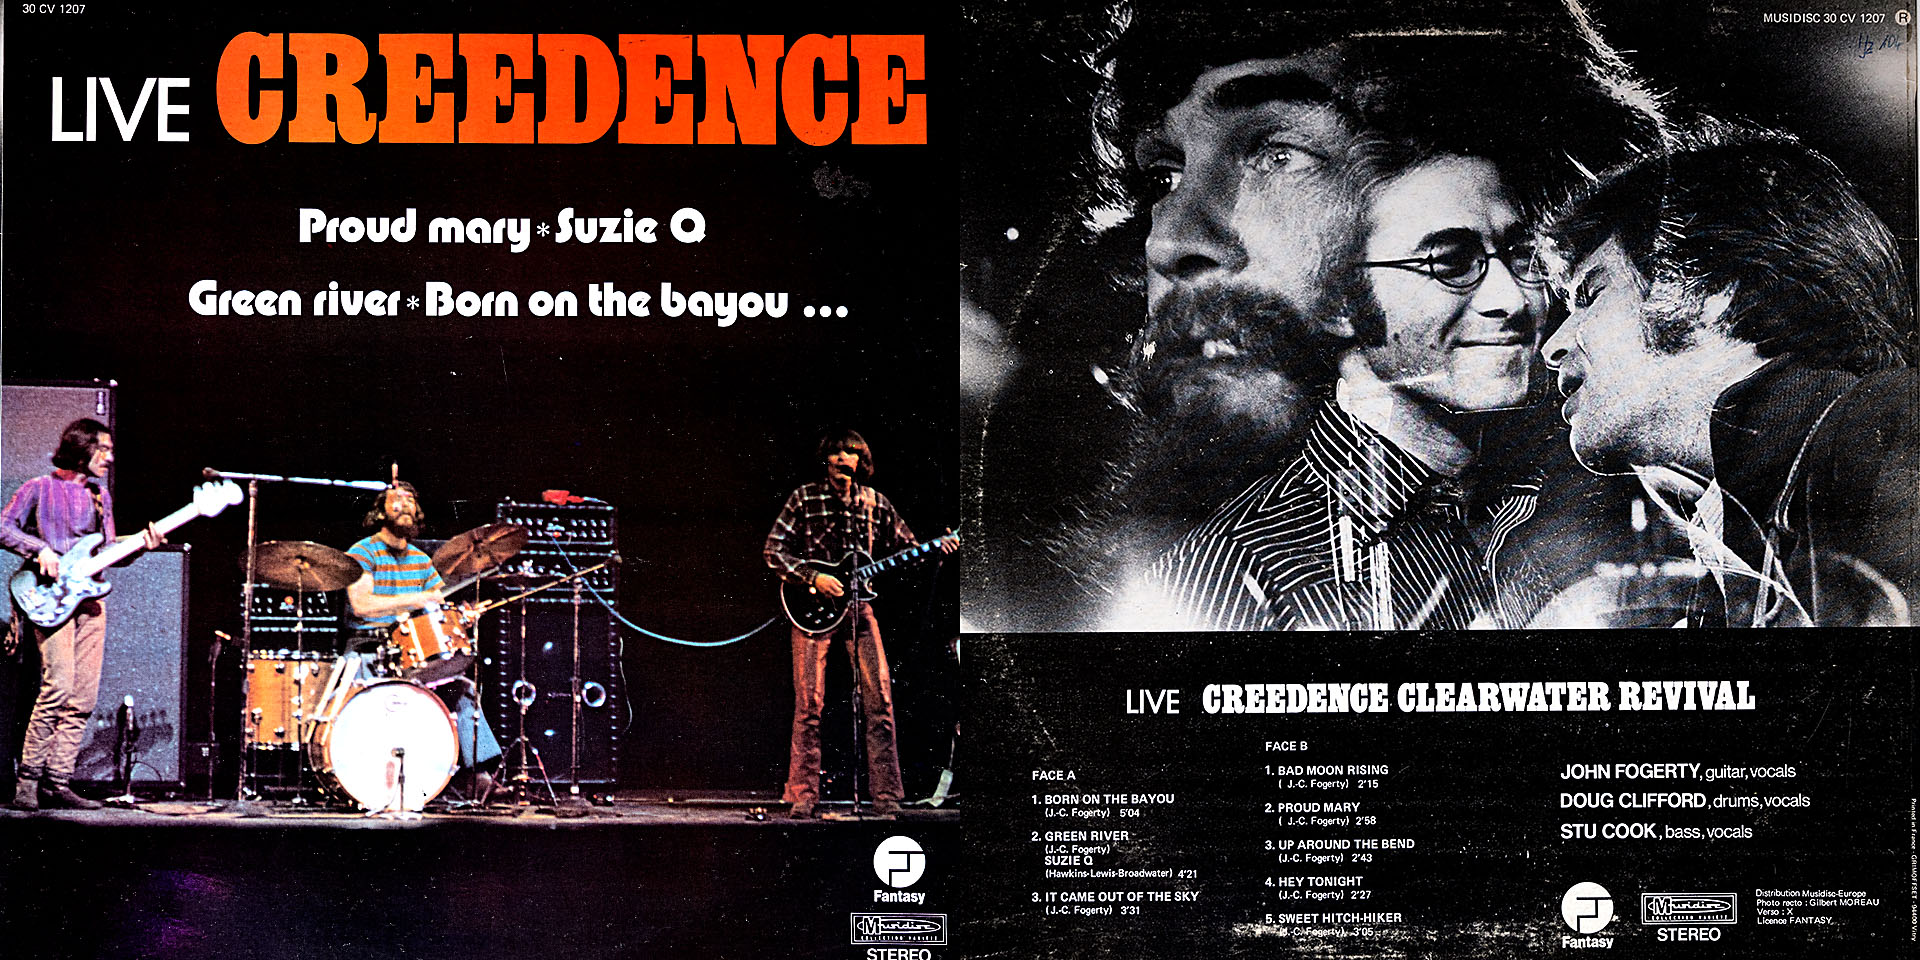 LIVE CREEDENCE - Creedence Clearwater Recival